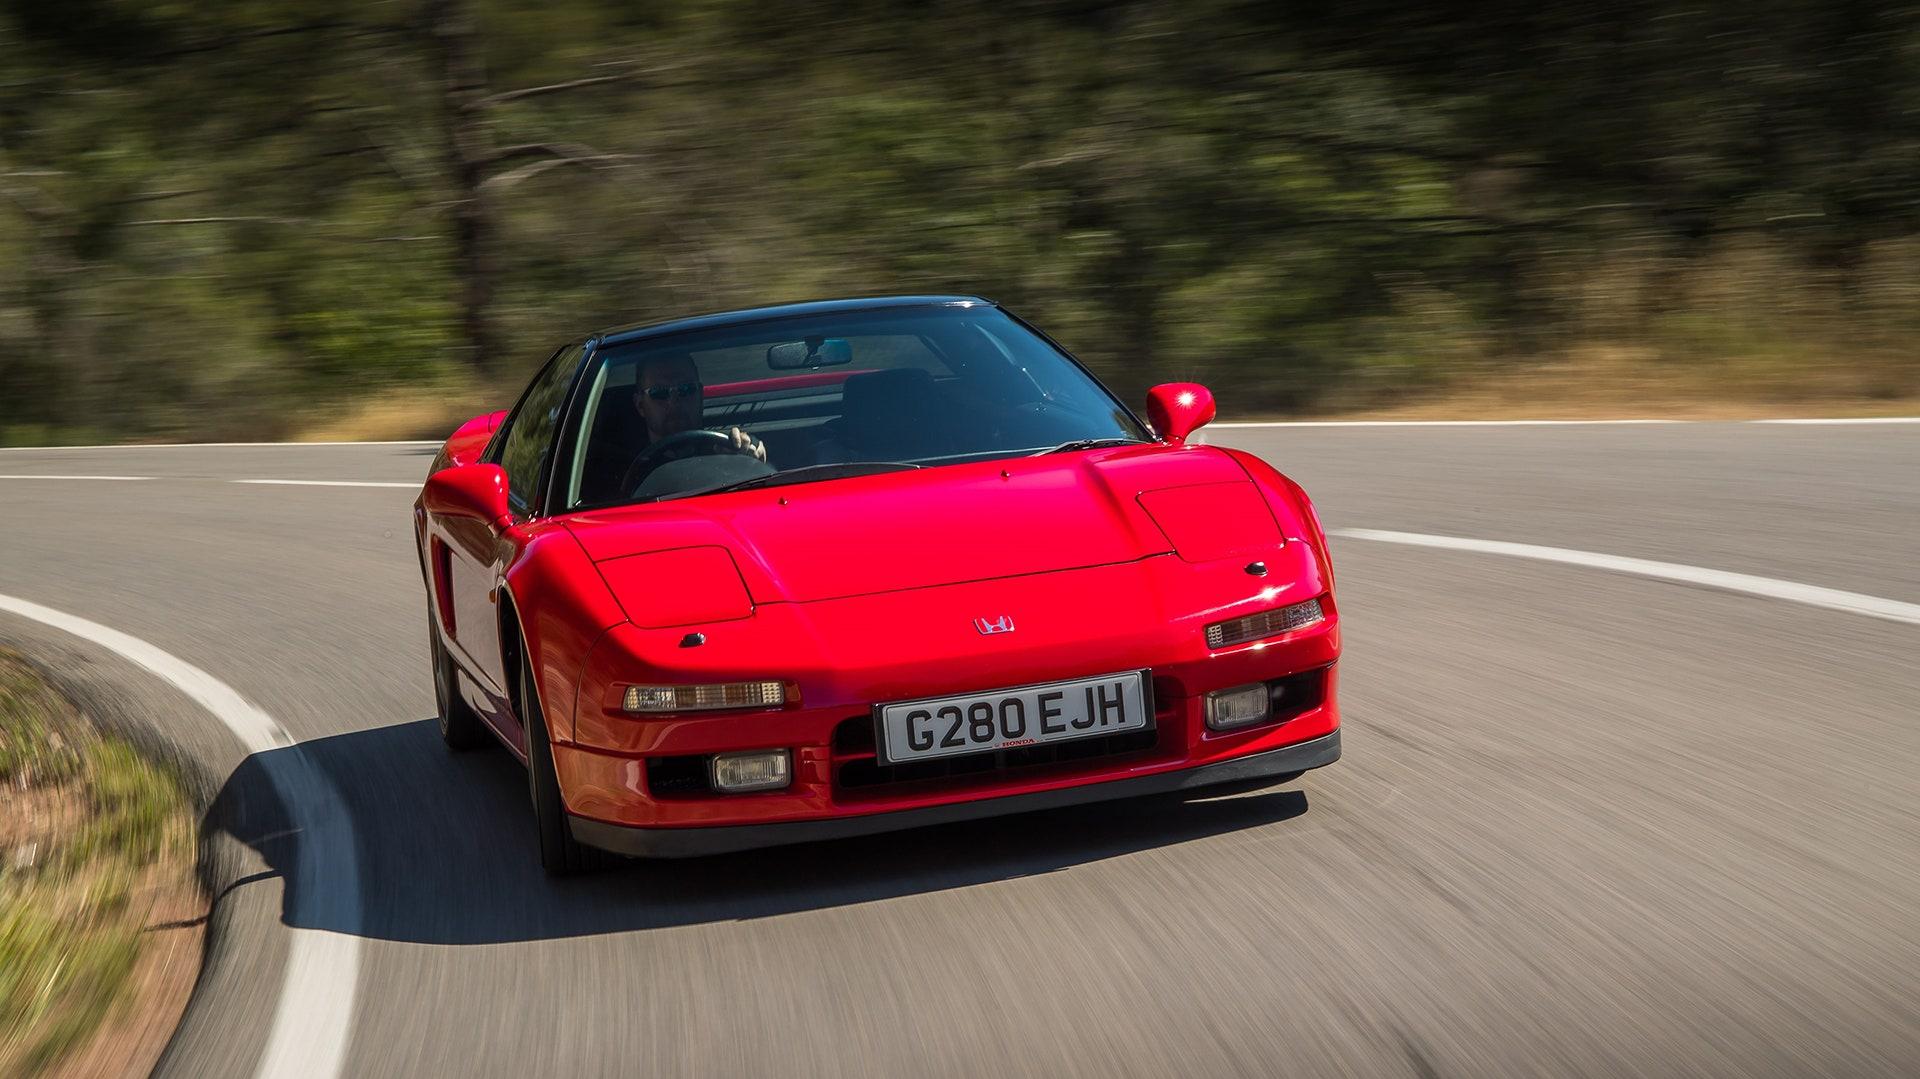 Honda NSX at the story of Japans unexpected supercar